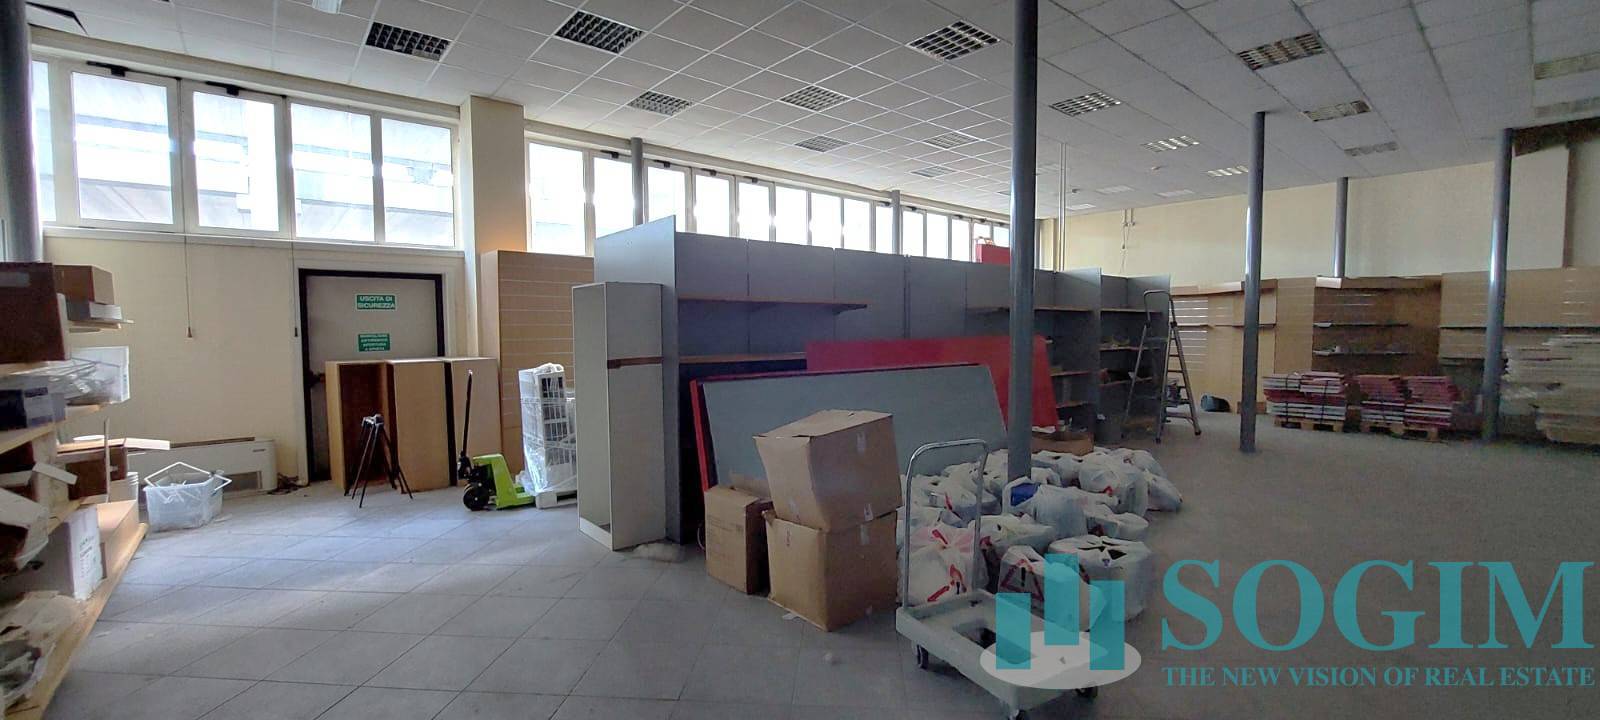 Affitto Capannone Commerciale/Industriale Brugherio 482539